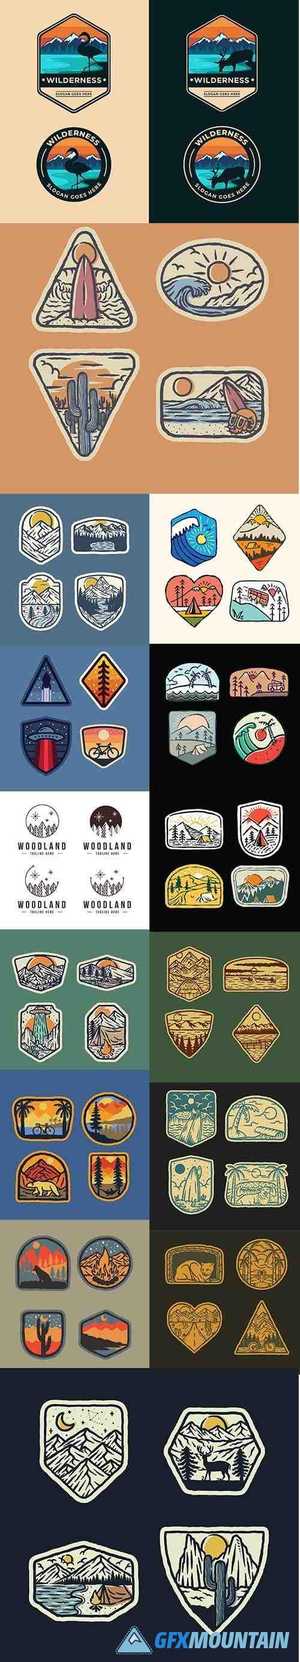 Camping, Mountain, Nature Wild Badge Graphic Illustrations Set